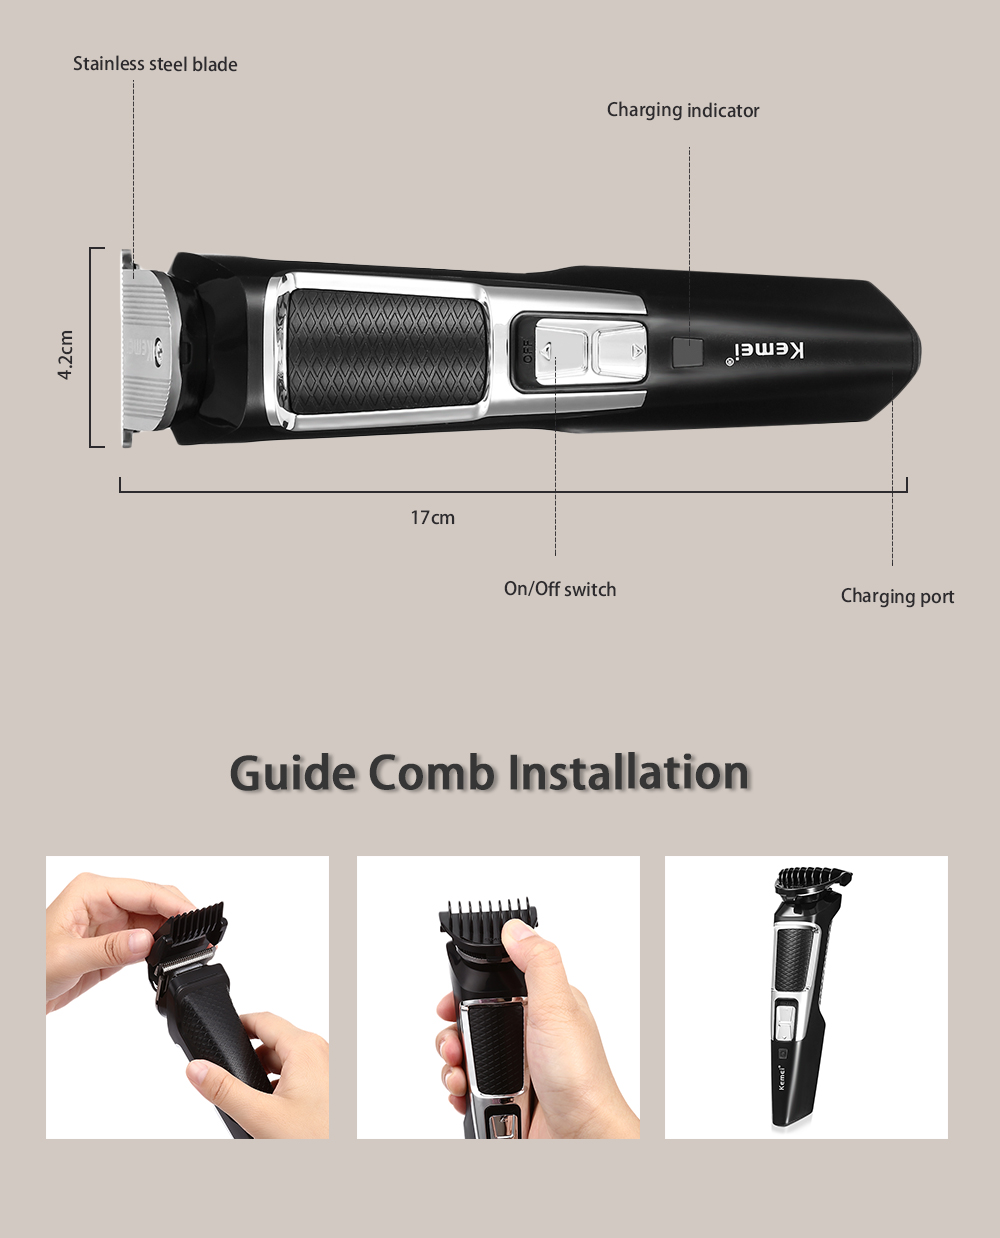 KM - 1605 Powerful Electric Hair Clipper Trimmer Styling Haircut